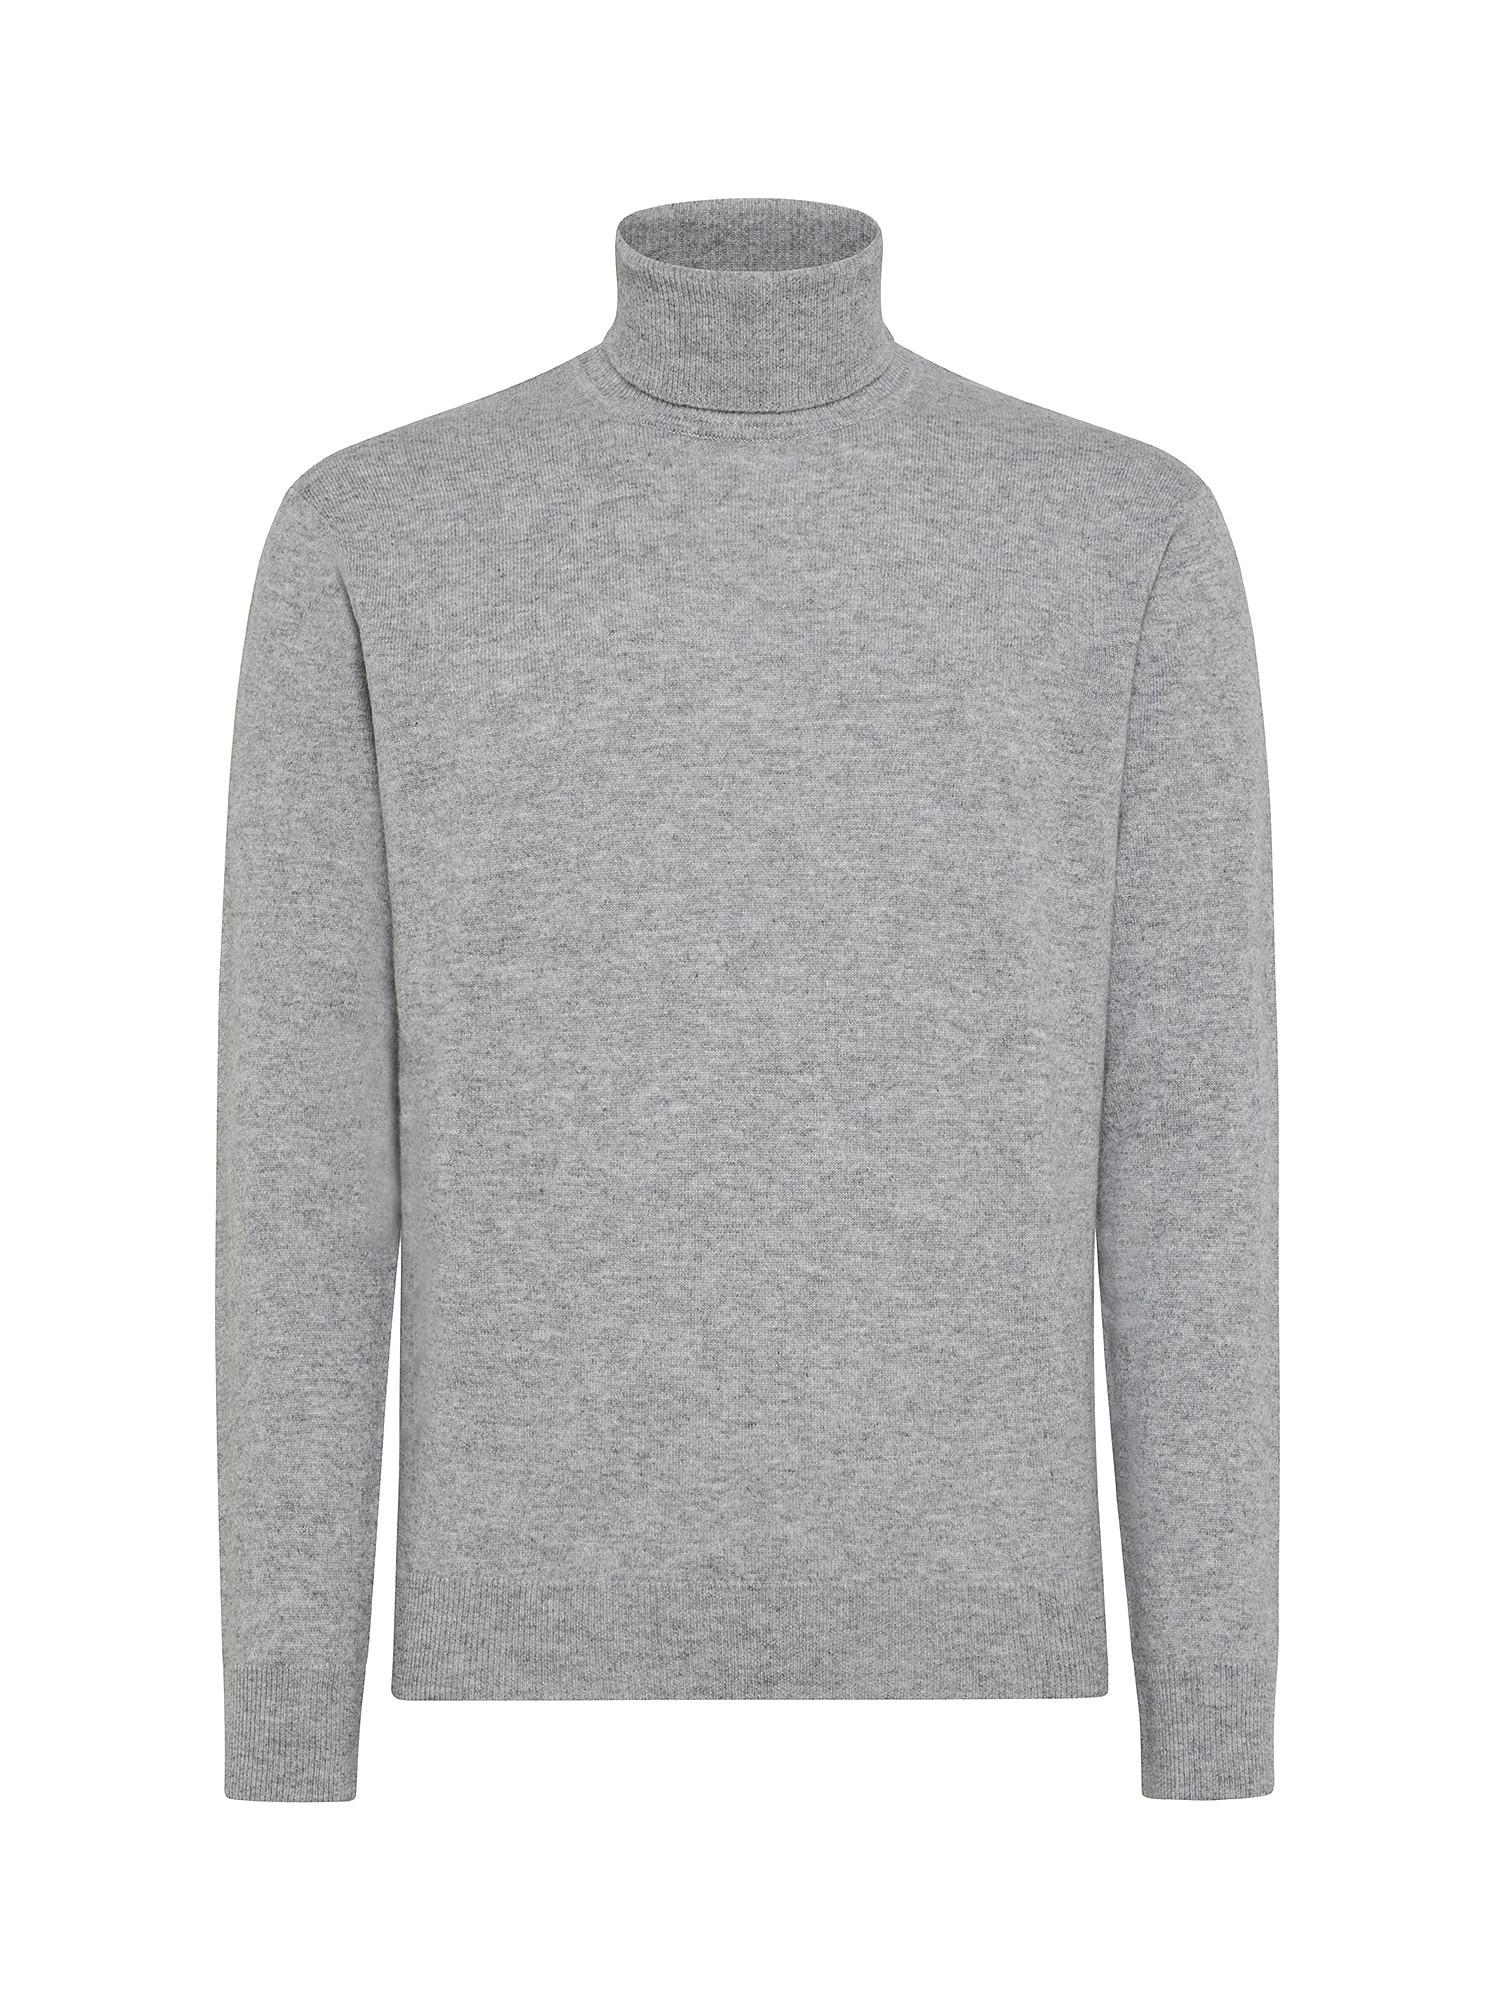 Coin Cashmere - Turtleneck in pure premium cashmere, Light Grey, large image number 0